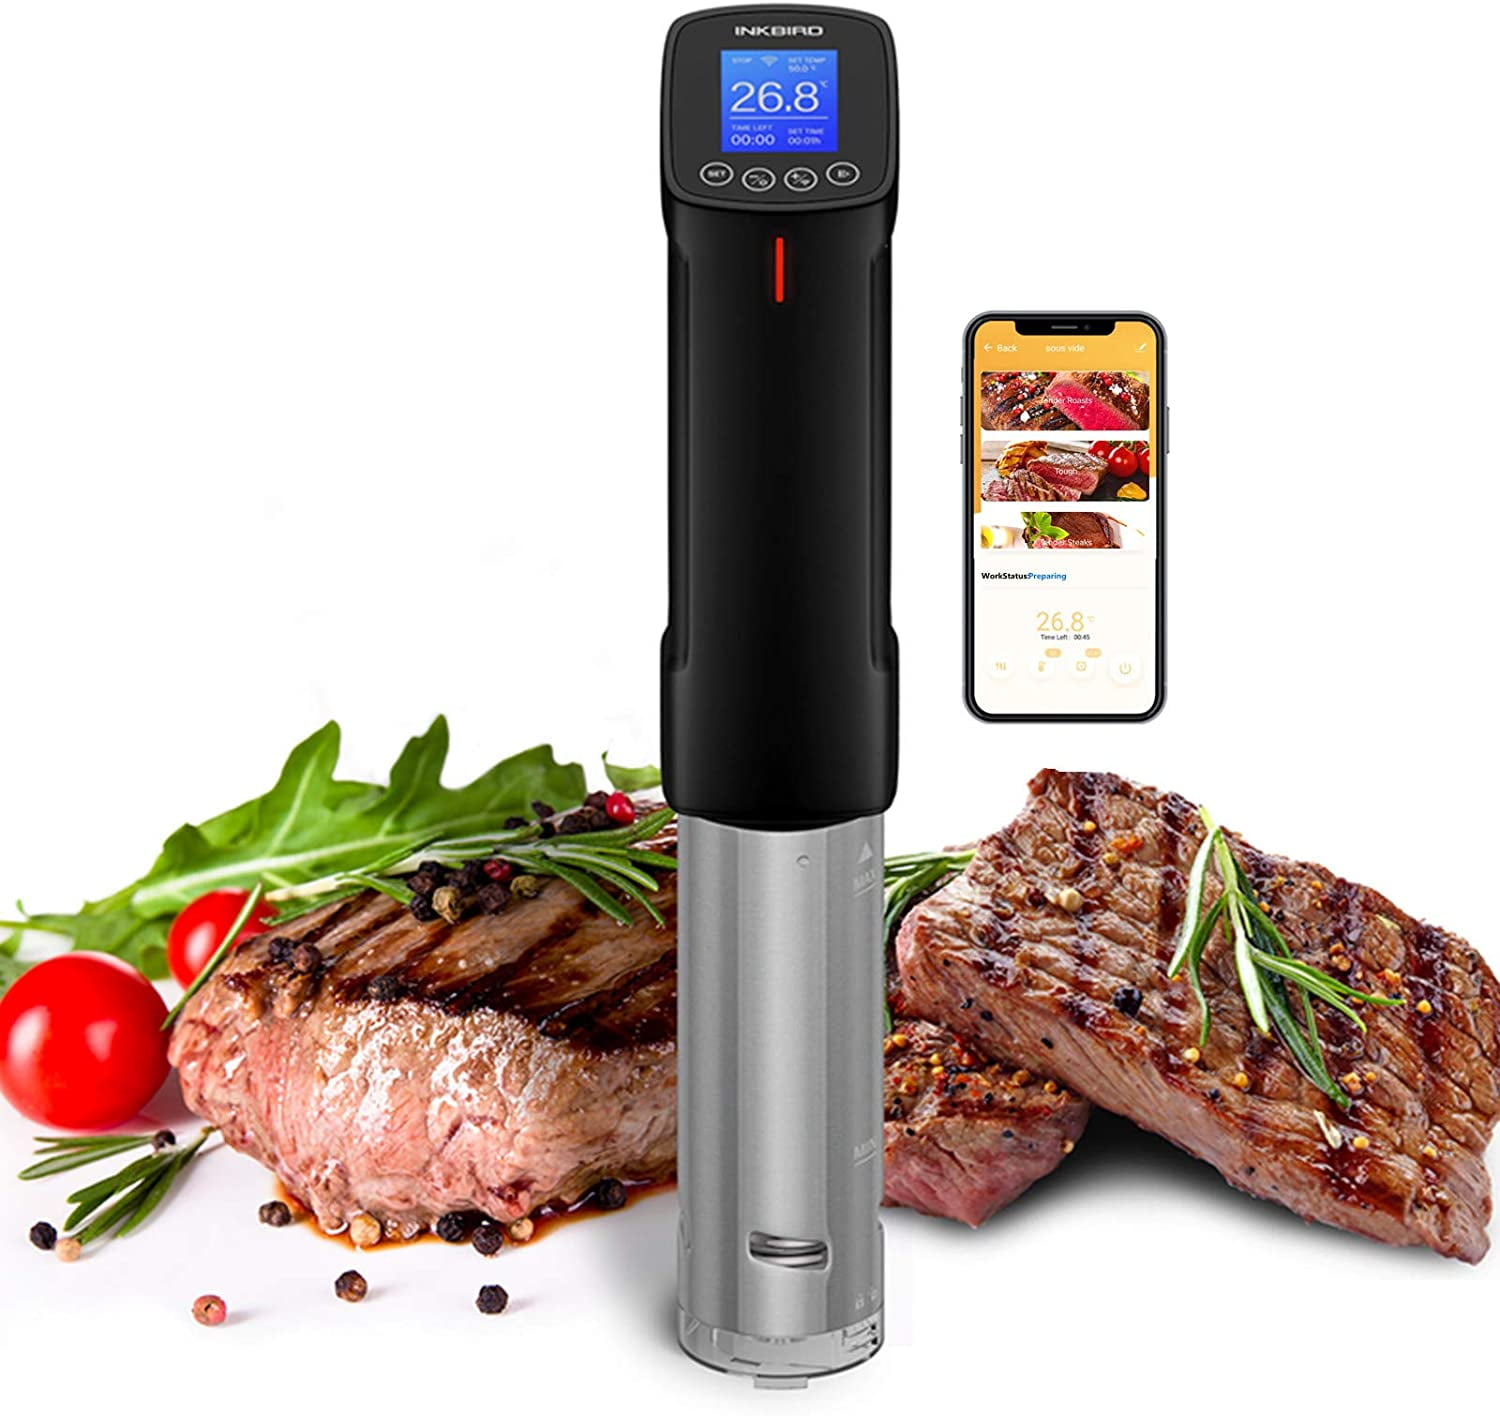 1000 Watts Black and Silver Anova Culinary AN500-US00 Sous Vide Precision Cooker Anova App Included WiFi 